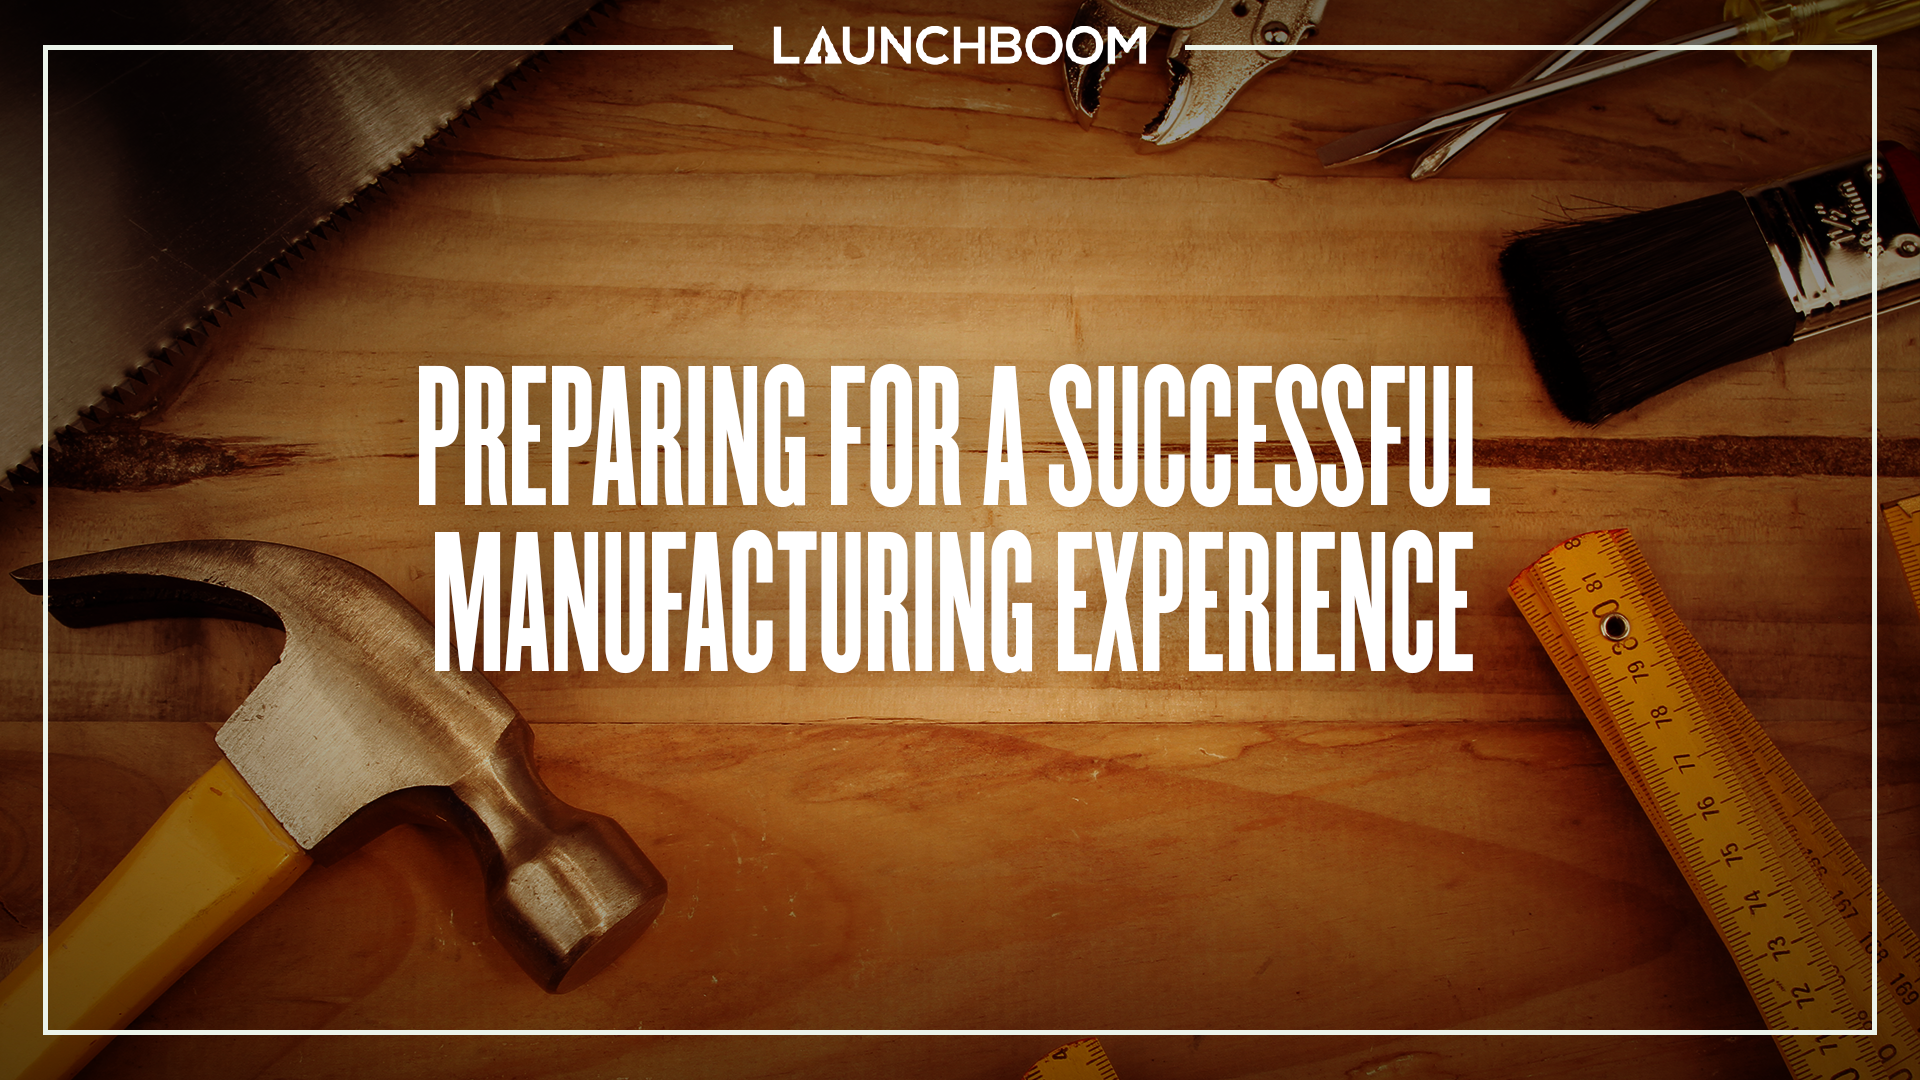 Prepare for a successful crowdfunding manufacturing experience